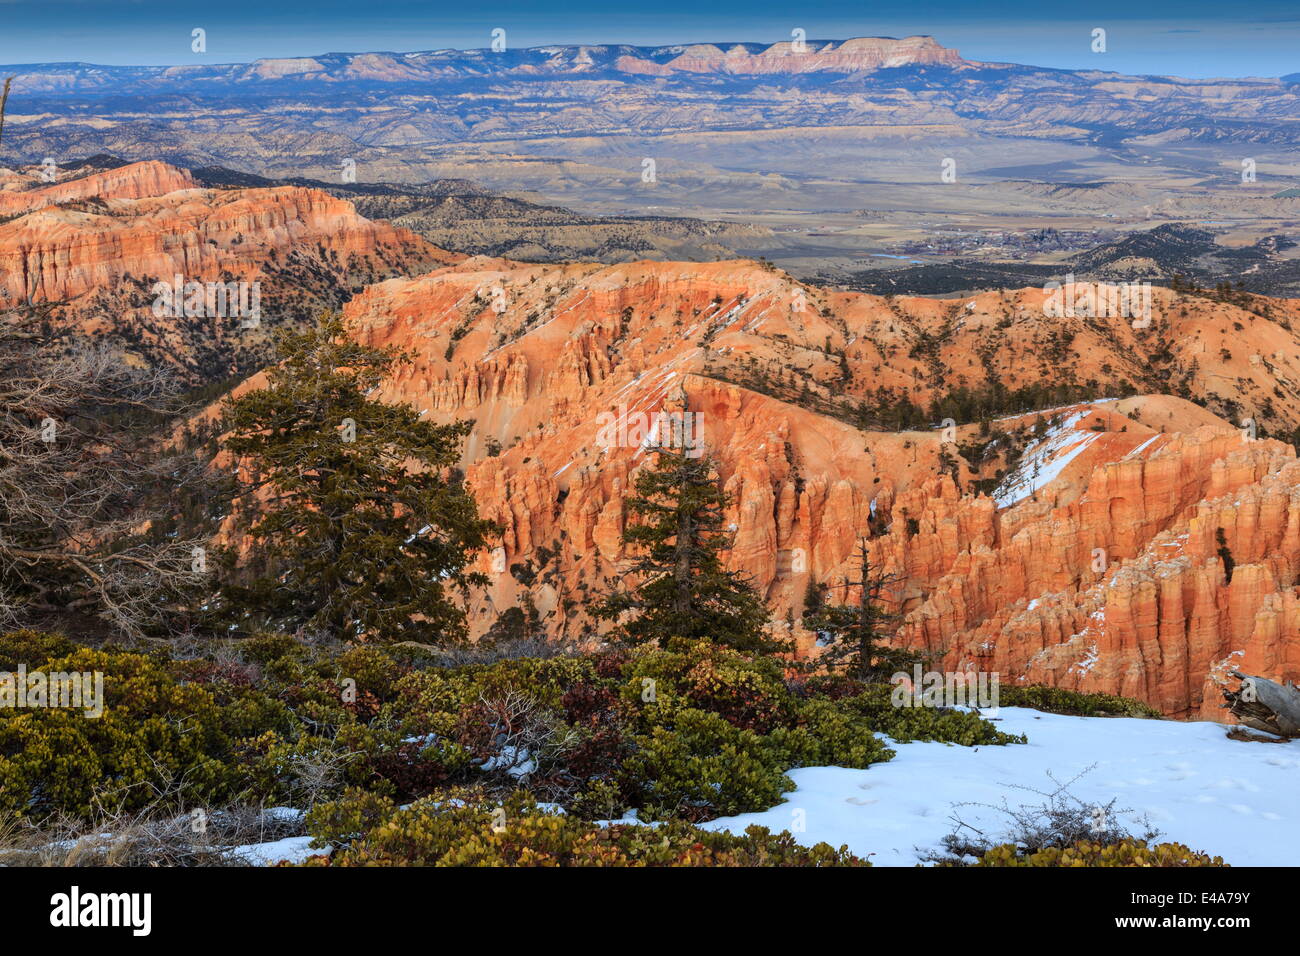 Hoodoos, vegetation and snow with a view on a winter's late afternoon, Bryce Point, Bryce Canyon National Park, Utah, USA Stock Photo